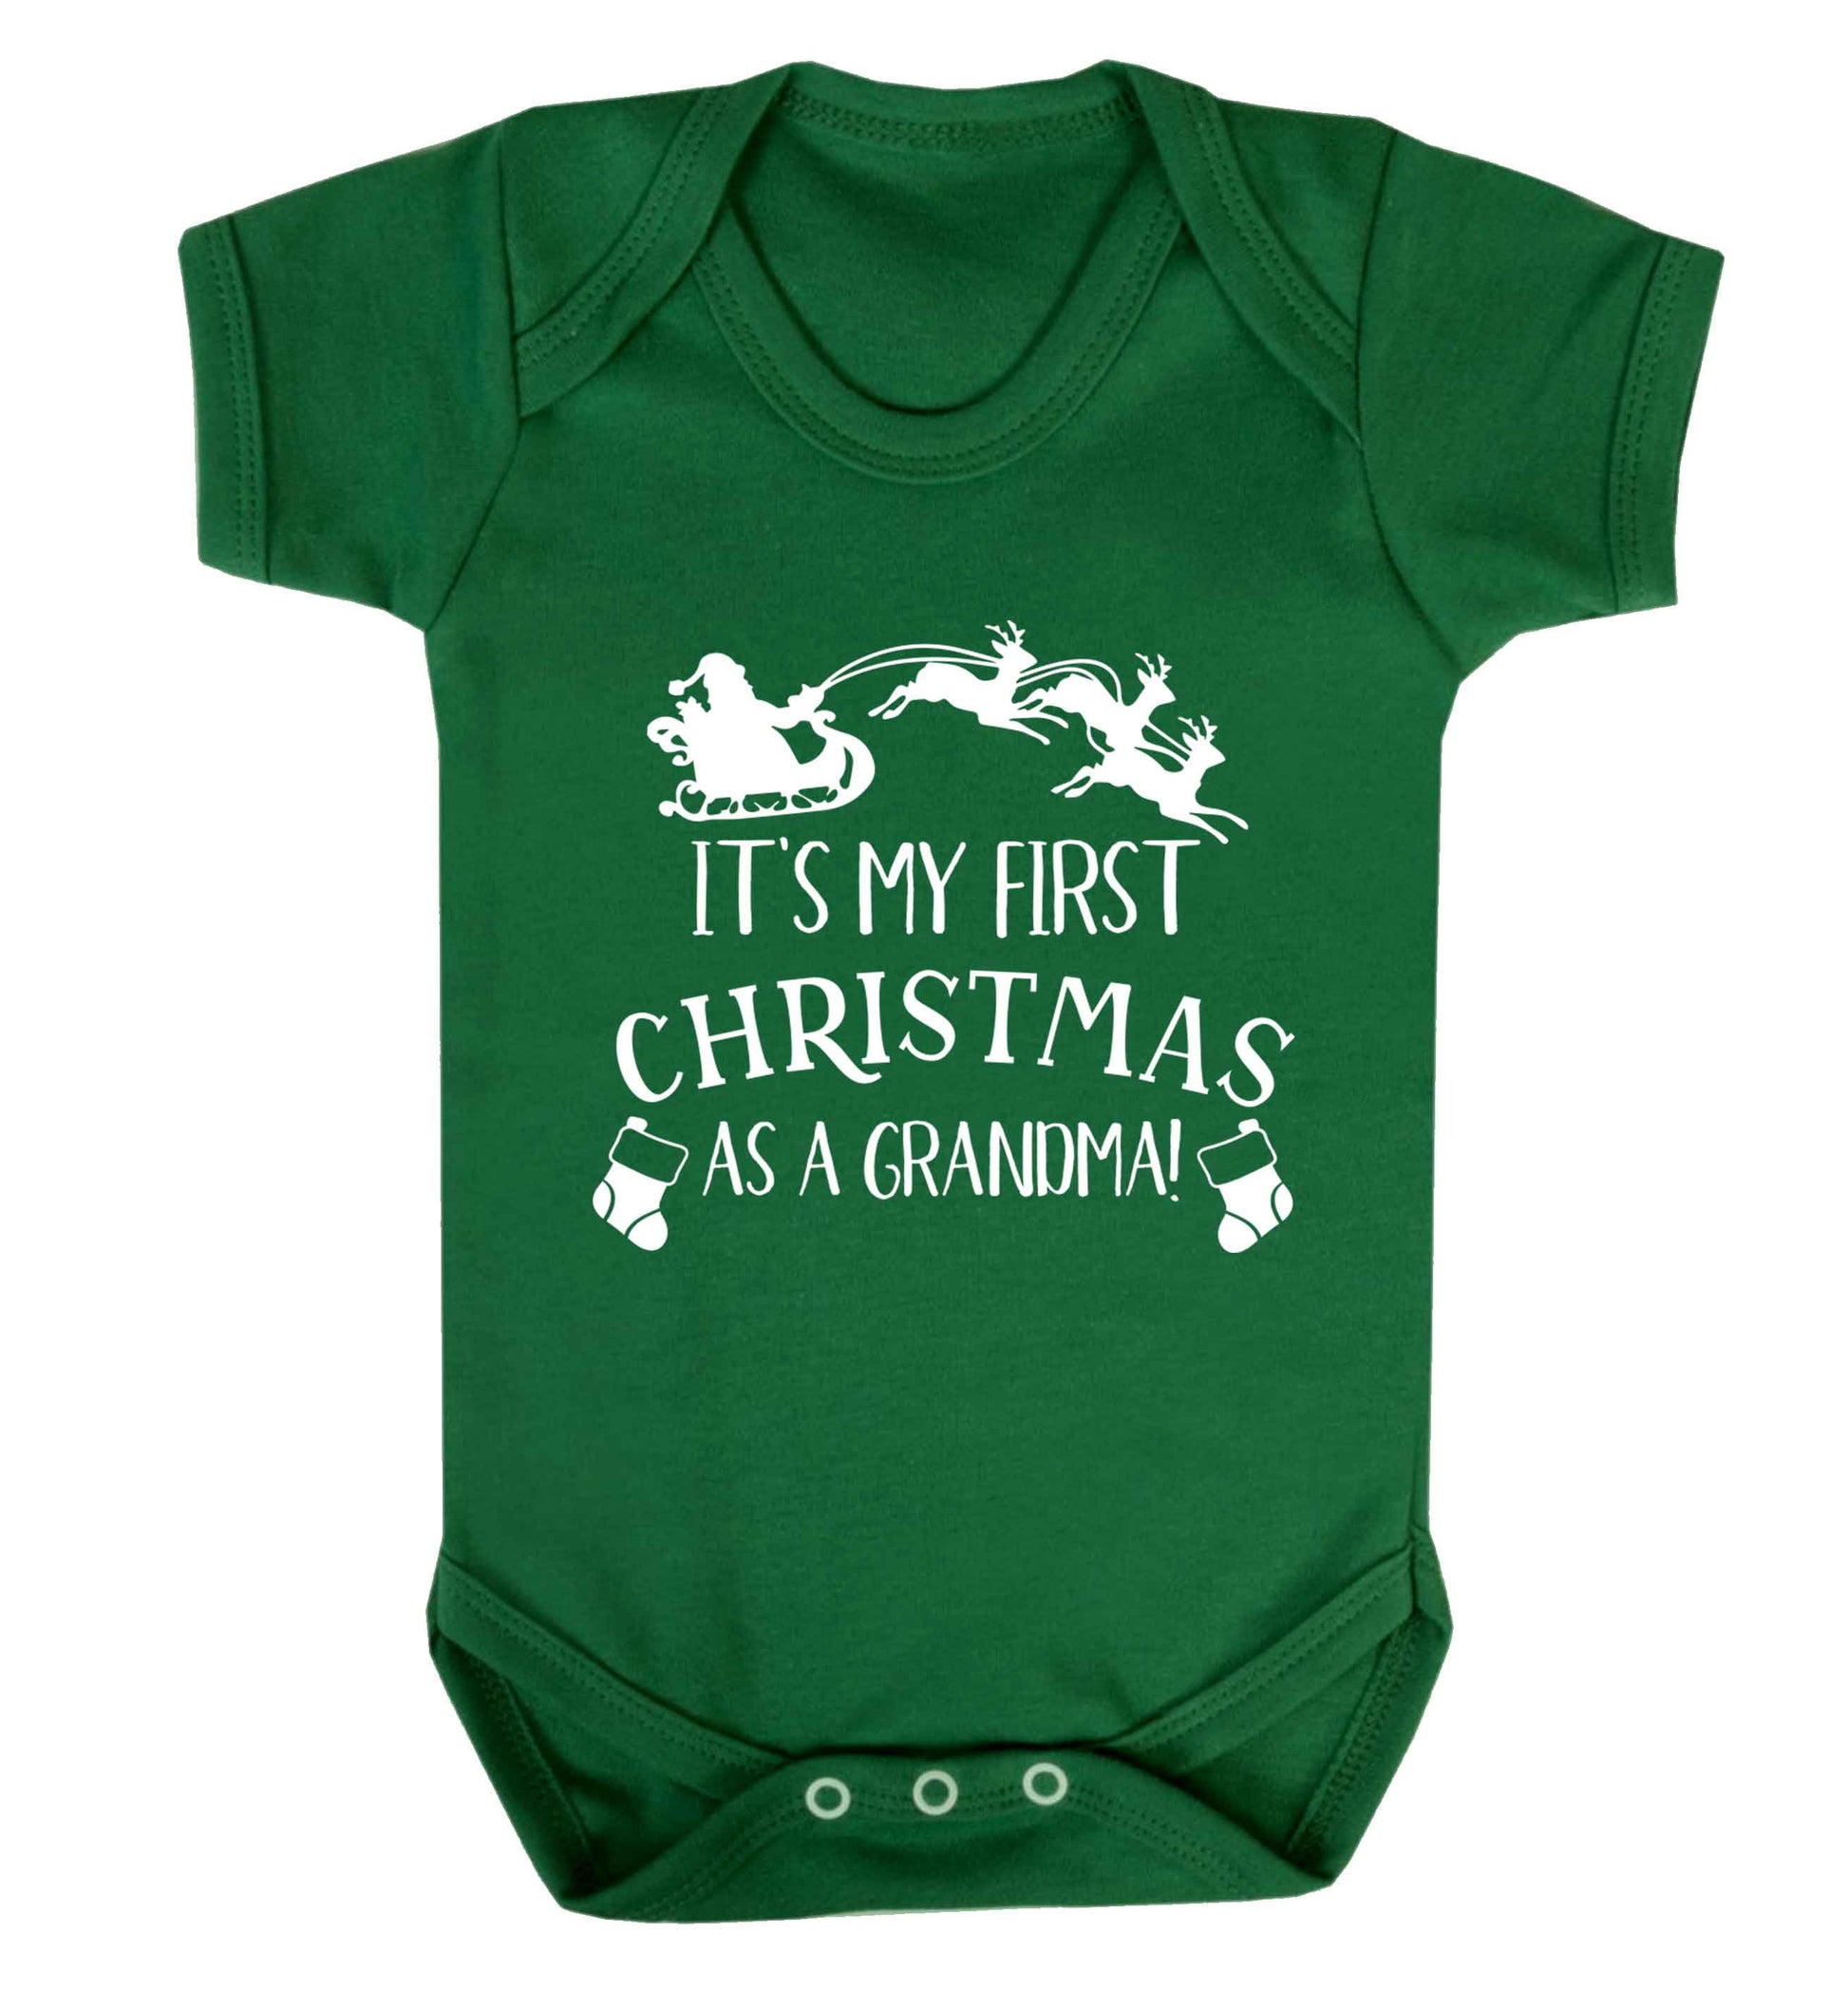 It's my first Christmas as a grandma! Baby Vest green 18-24 months